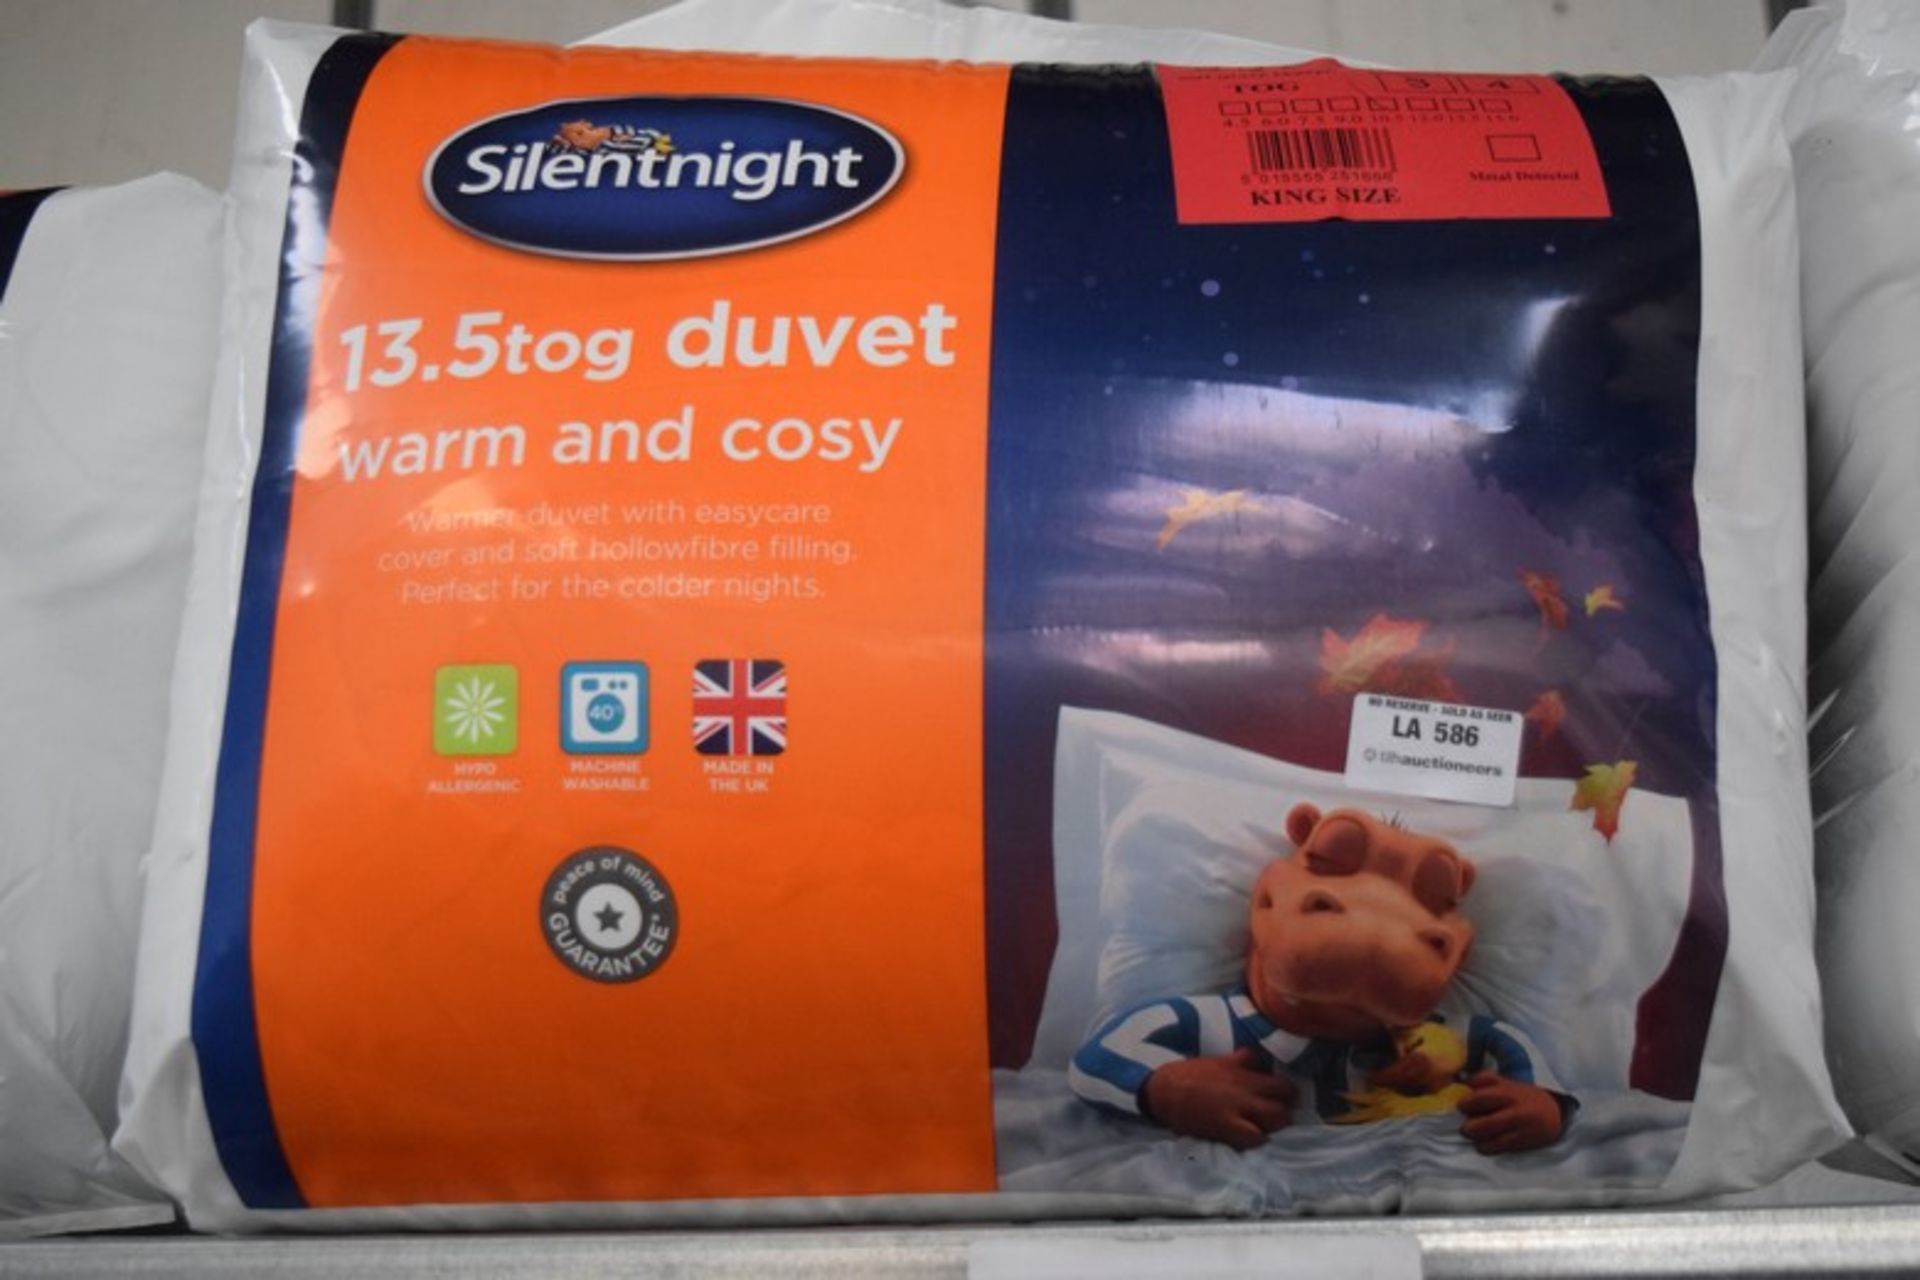 1 X BAGGED BRAND NEW SILENT NIGHT 13.5 TOG WARM AND COSY KING SIZE DUVET RRP £30 (TW)